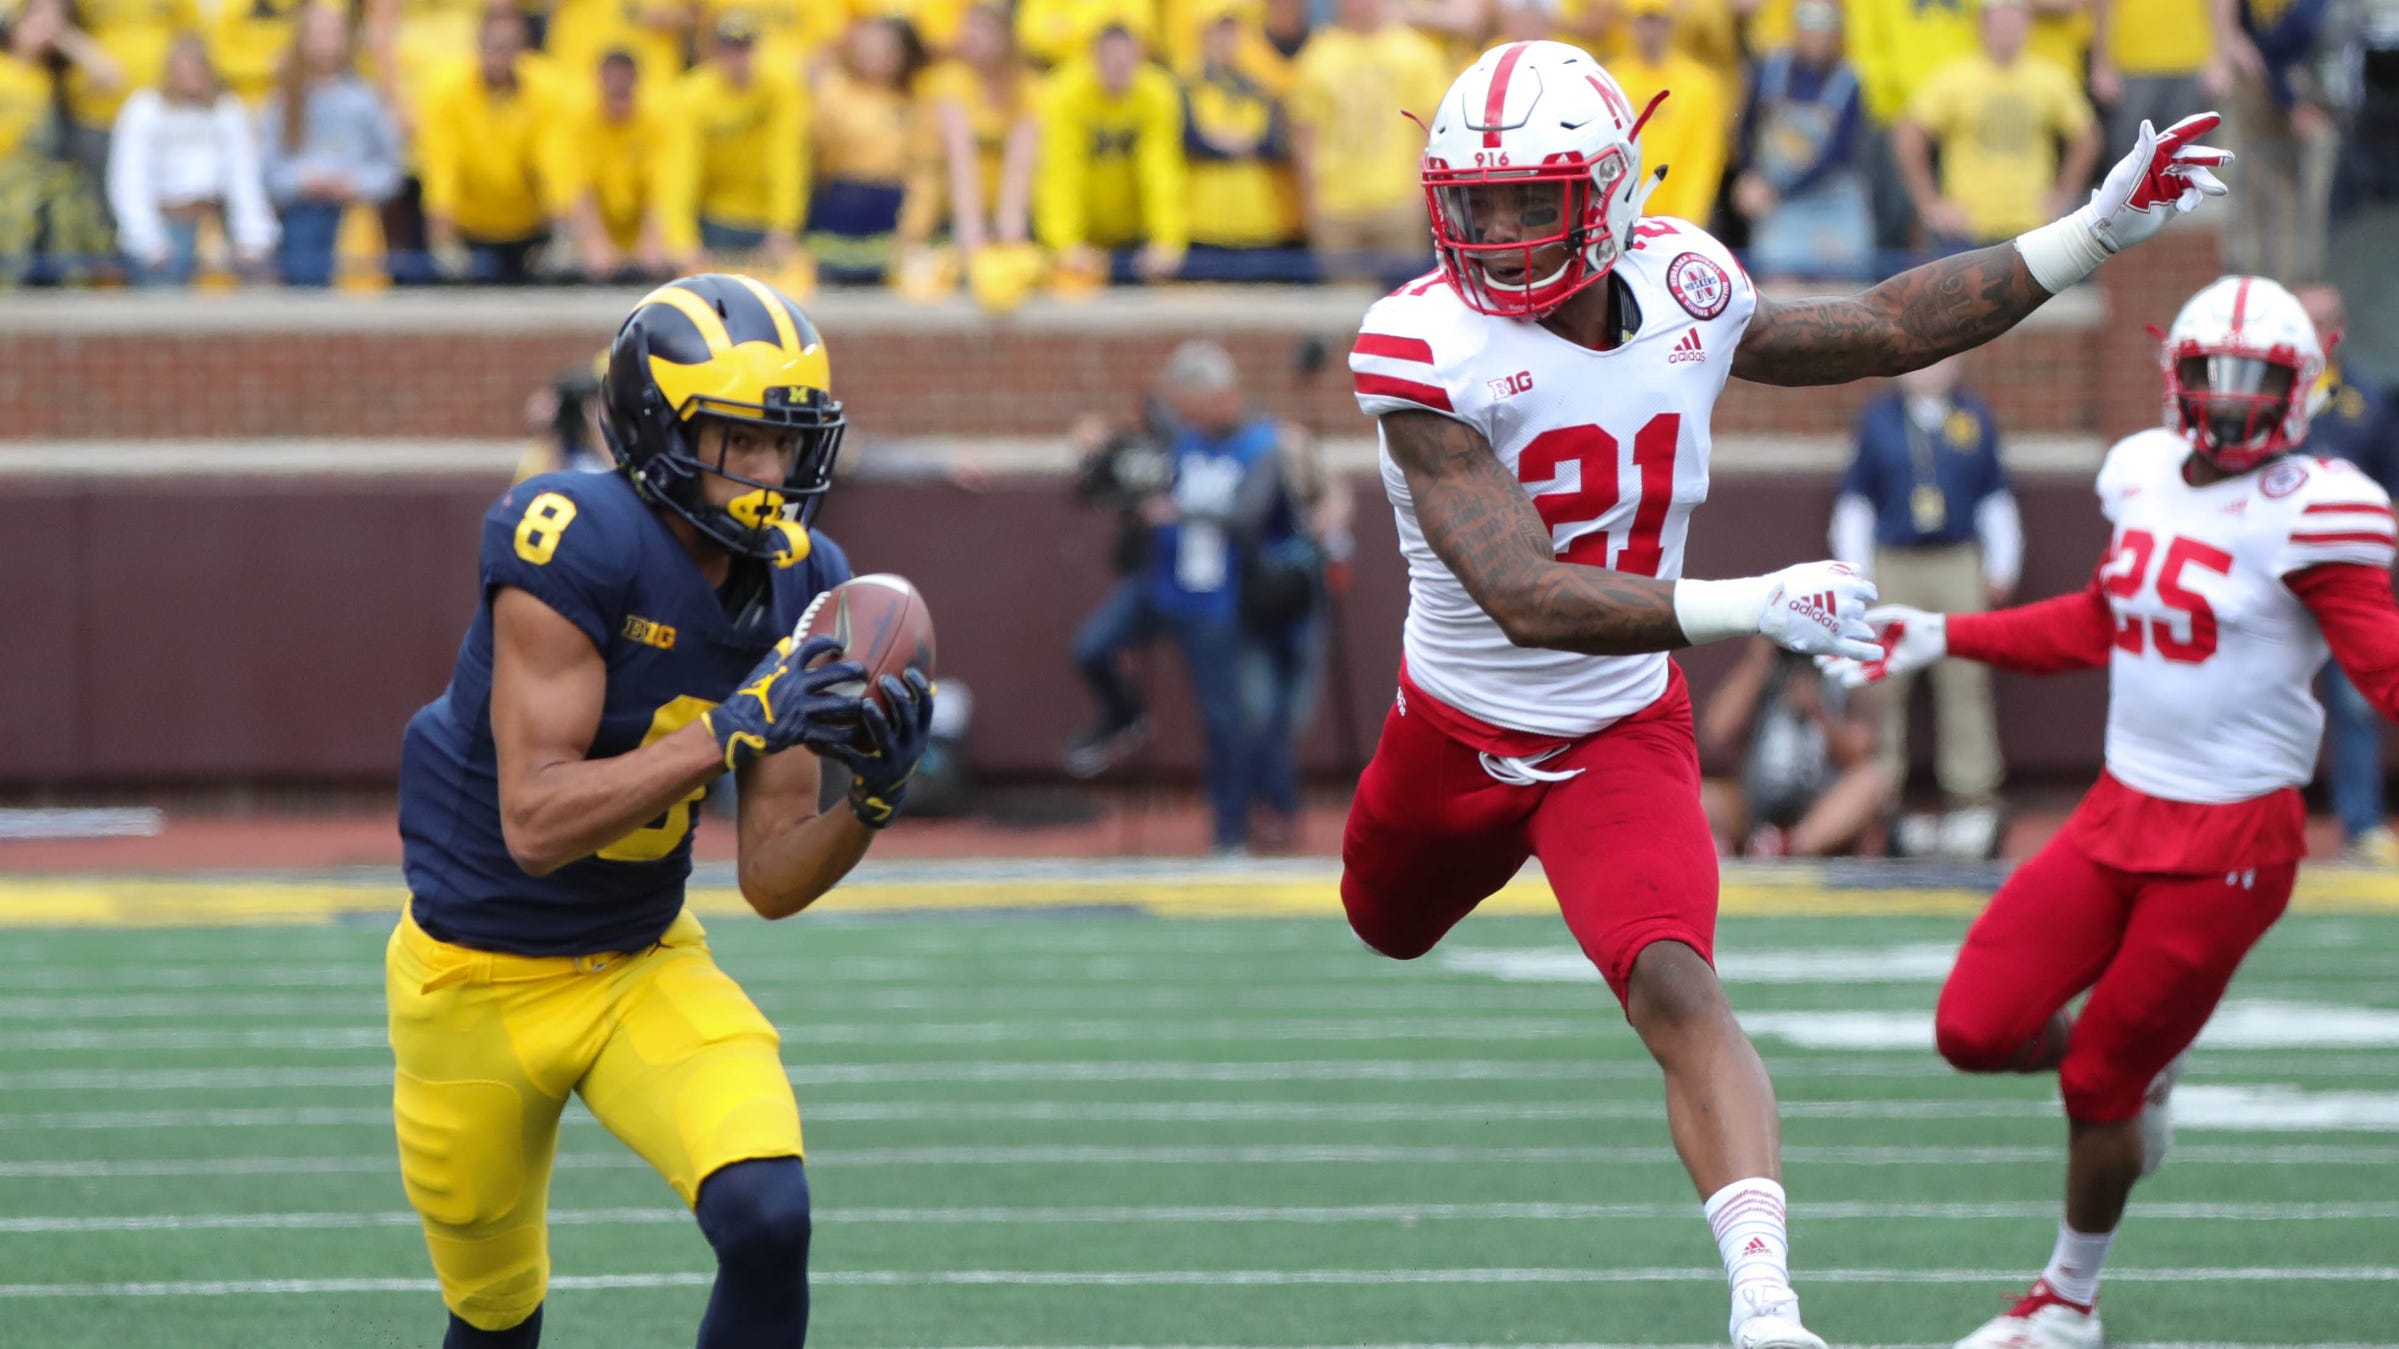 Michigan's Ronnie Bell primed for big year as most improved player